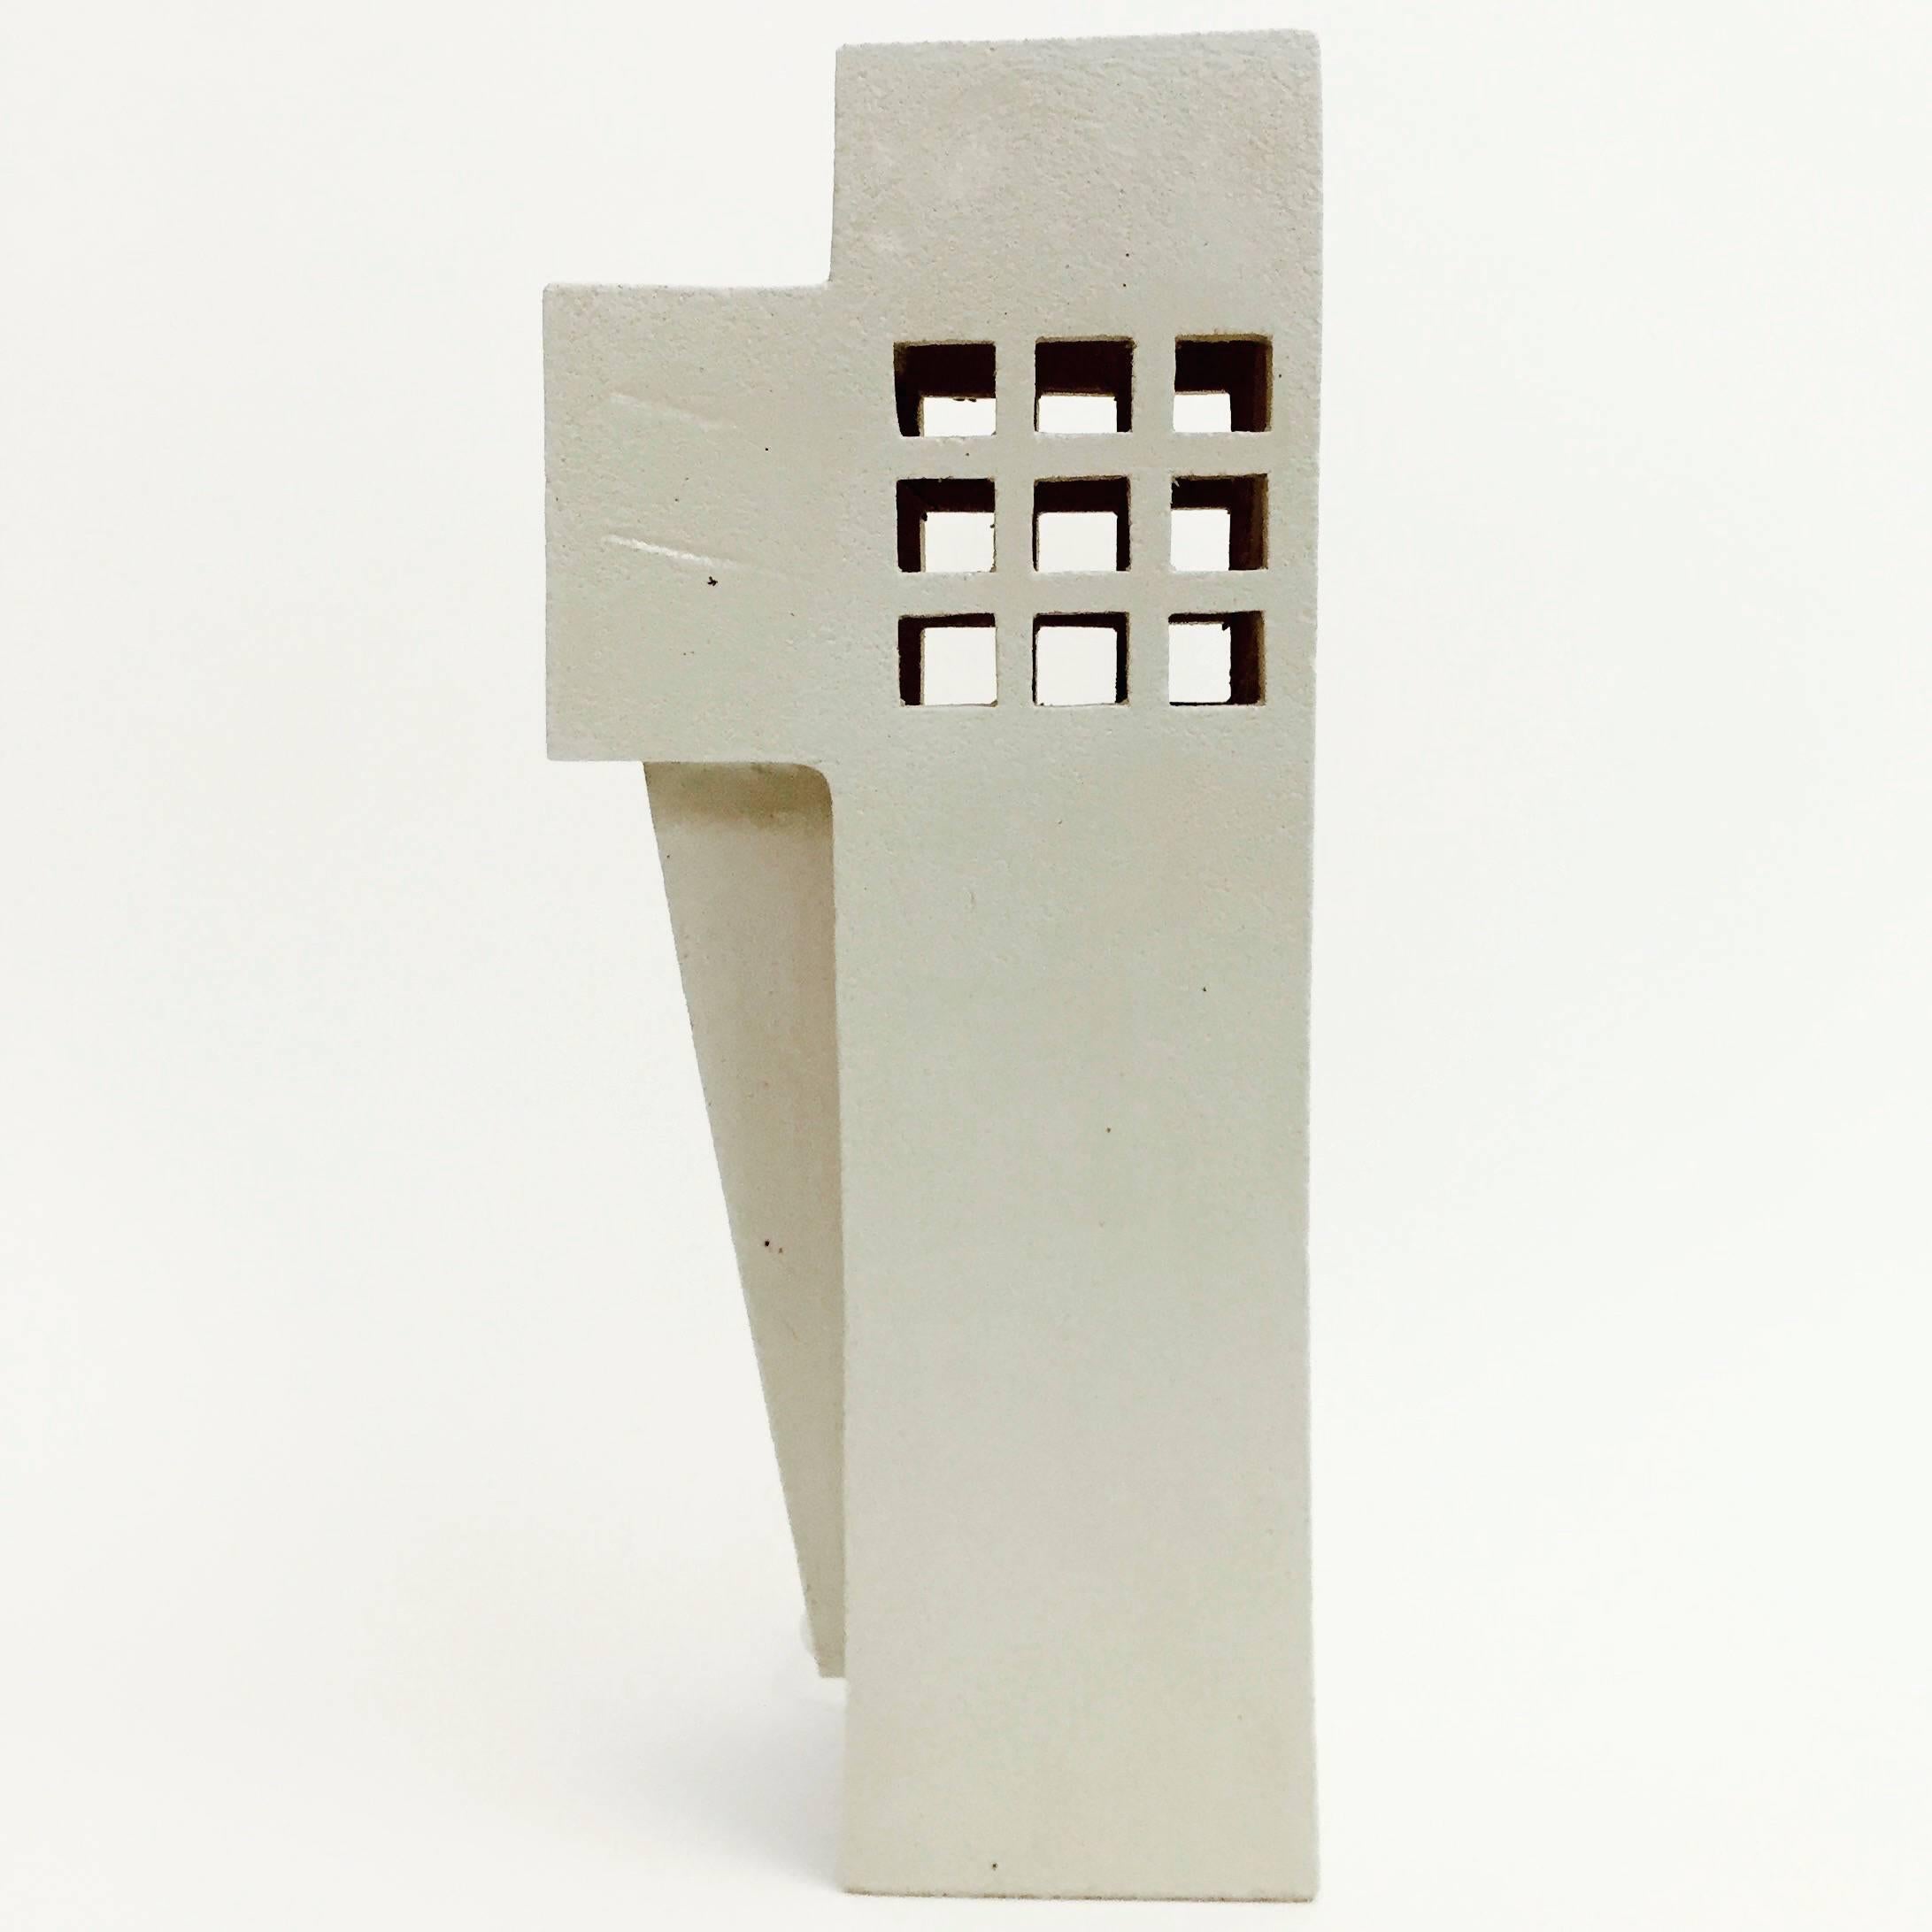 Geometric sculpture, forming a column lamp base, textured clay glazed in shades of pale cream, decorated with open windows perforations.
One of a kind contemporary handmade creation, designed by the French ceramicist.

Note to International